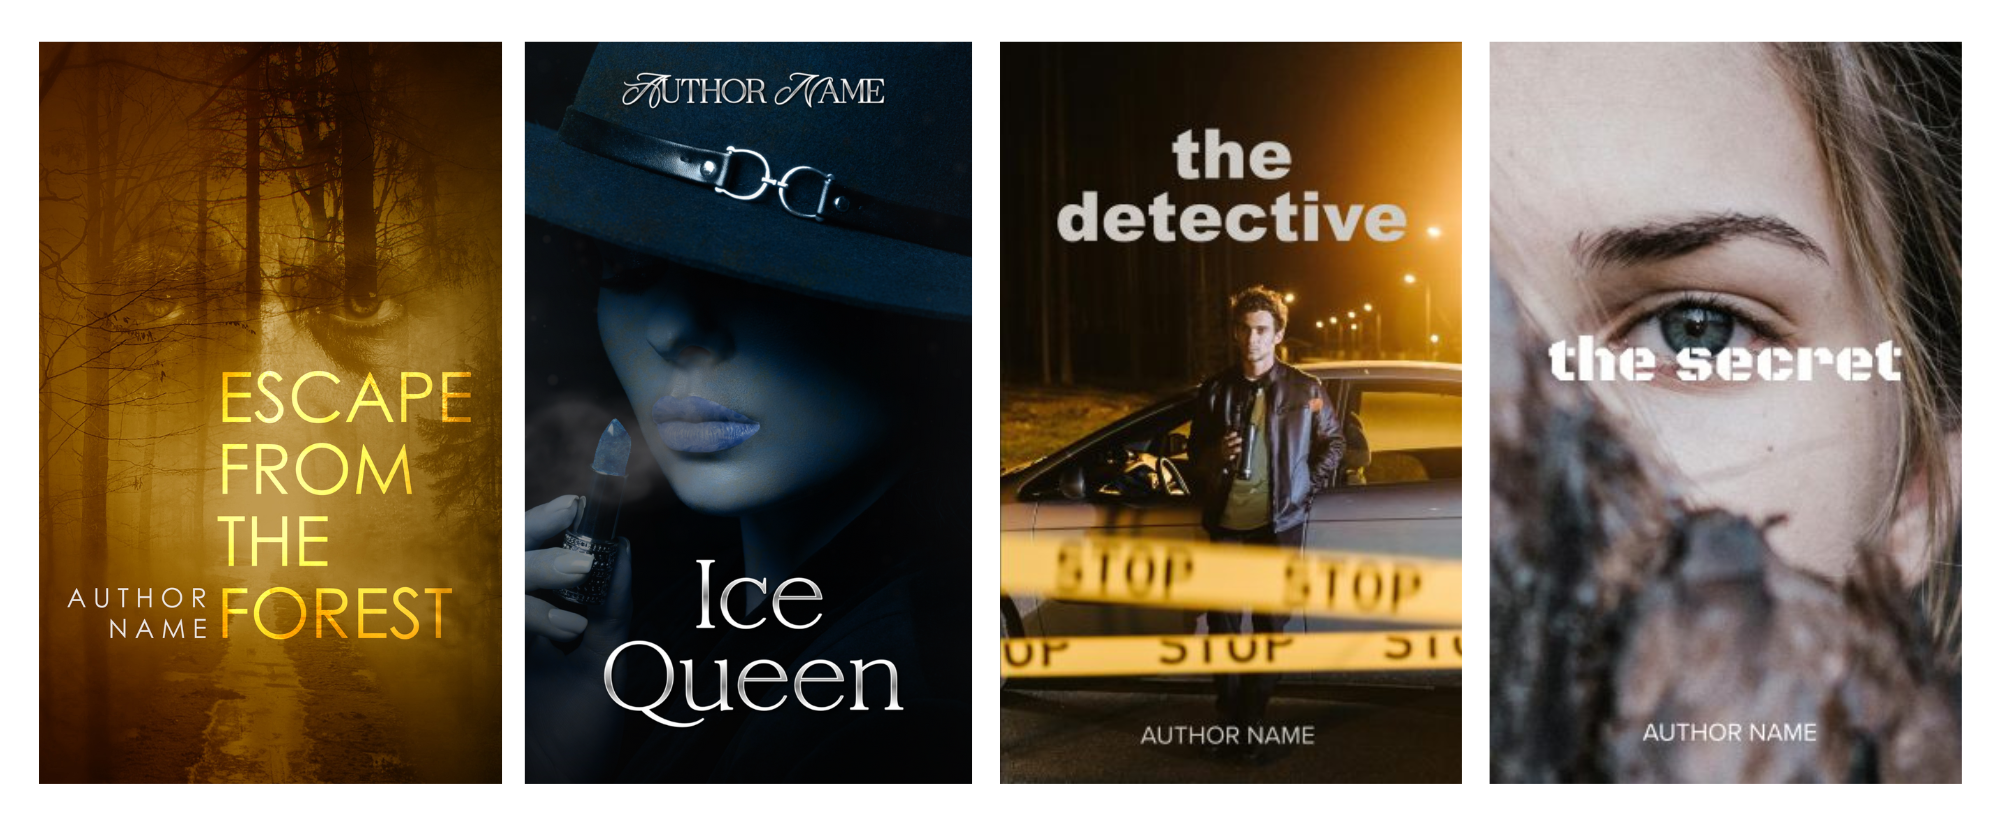 Four book covers are displayed. The first shows a foggy forest with “Escape from the Forest” in yellow text. The second features a mysterious person in a dark hat with “Ice Queen” in white text. The third displays a person by a car with “the detective” in white text. The fourth shows part of a face with “the secret” in white text. BookSelf Book Cover Design & Premade Book Covers